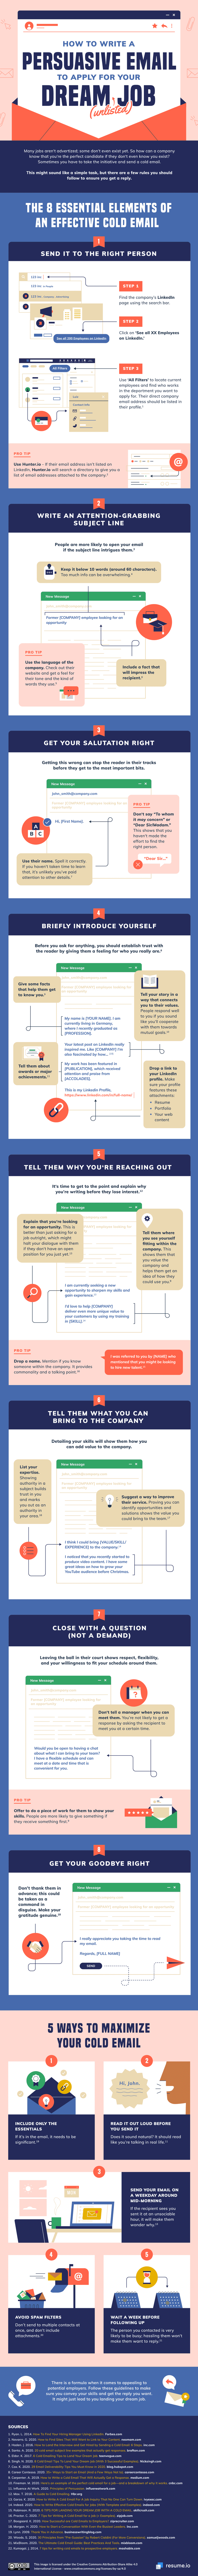 Infographic showing eight elements of a cold email to send when applying for an unlisted job.